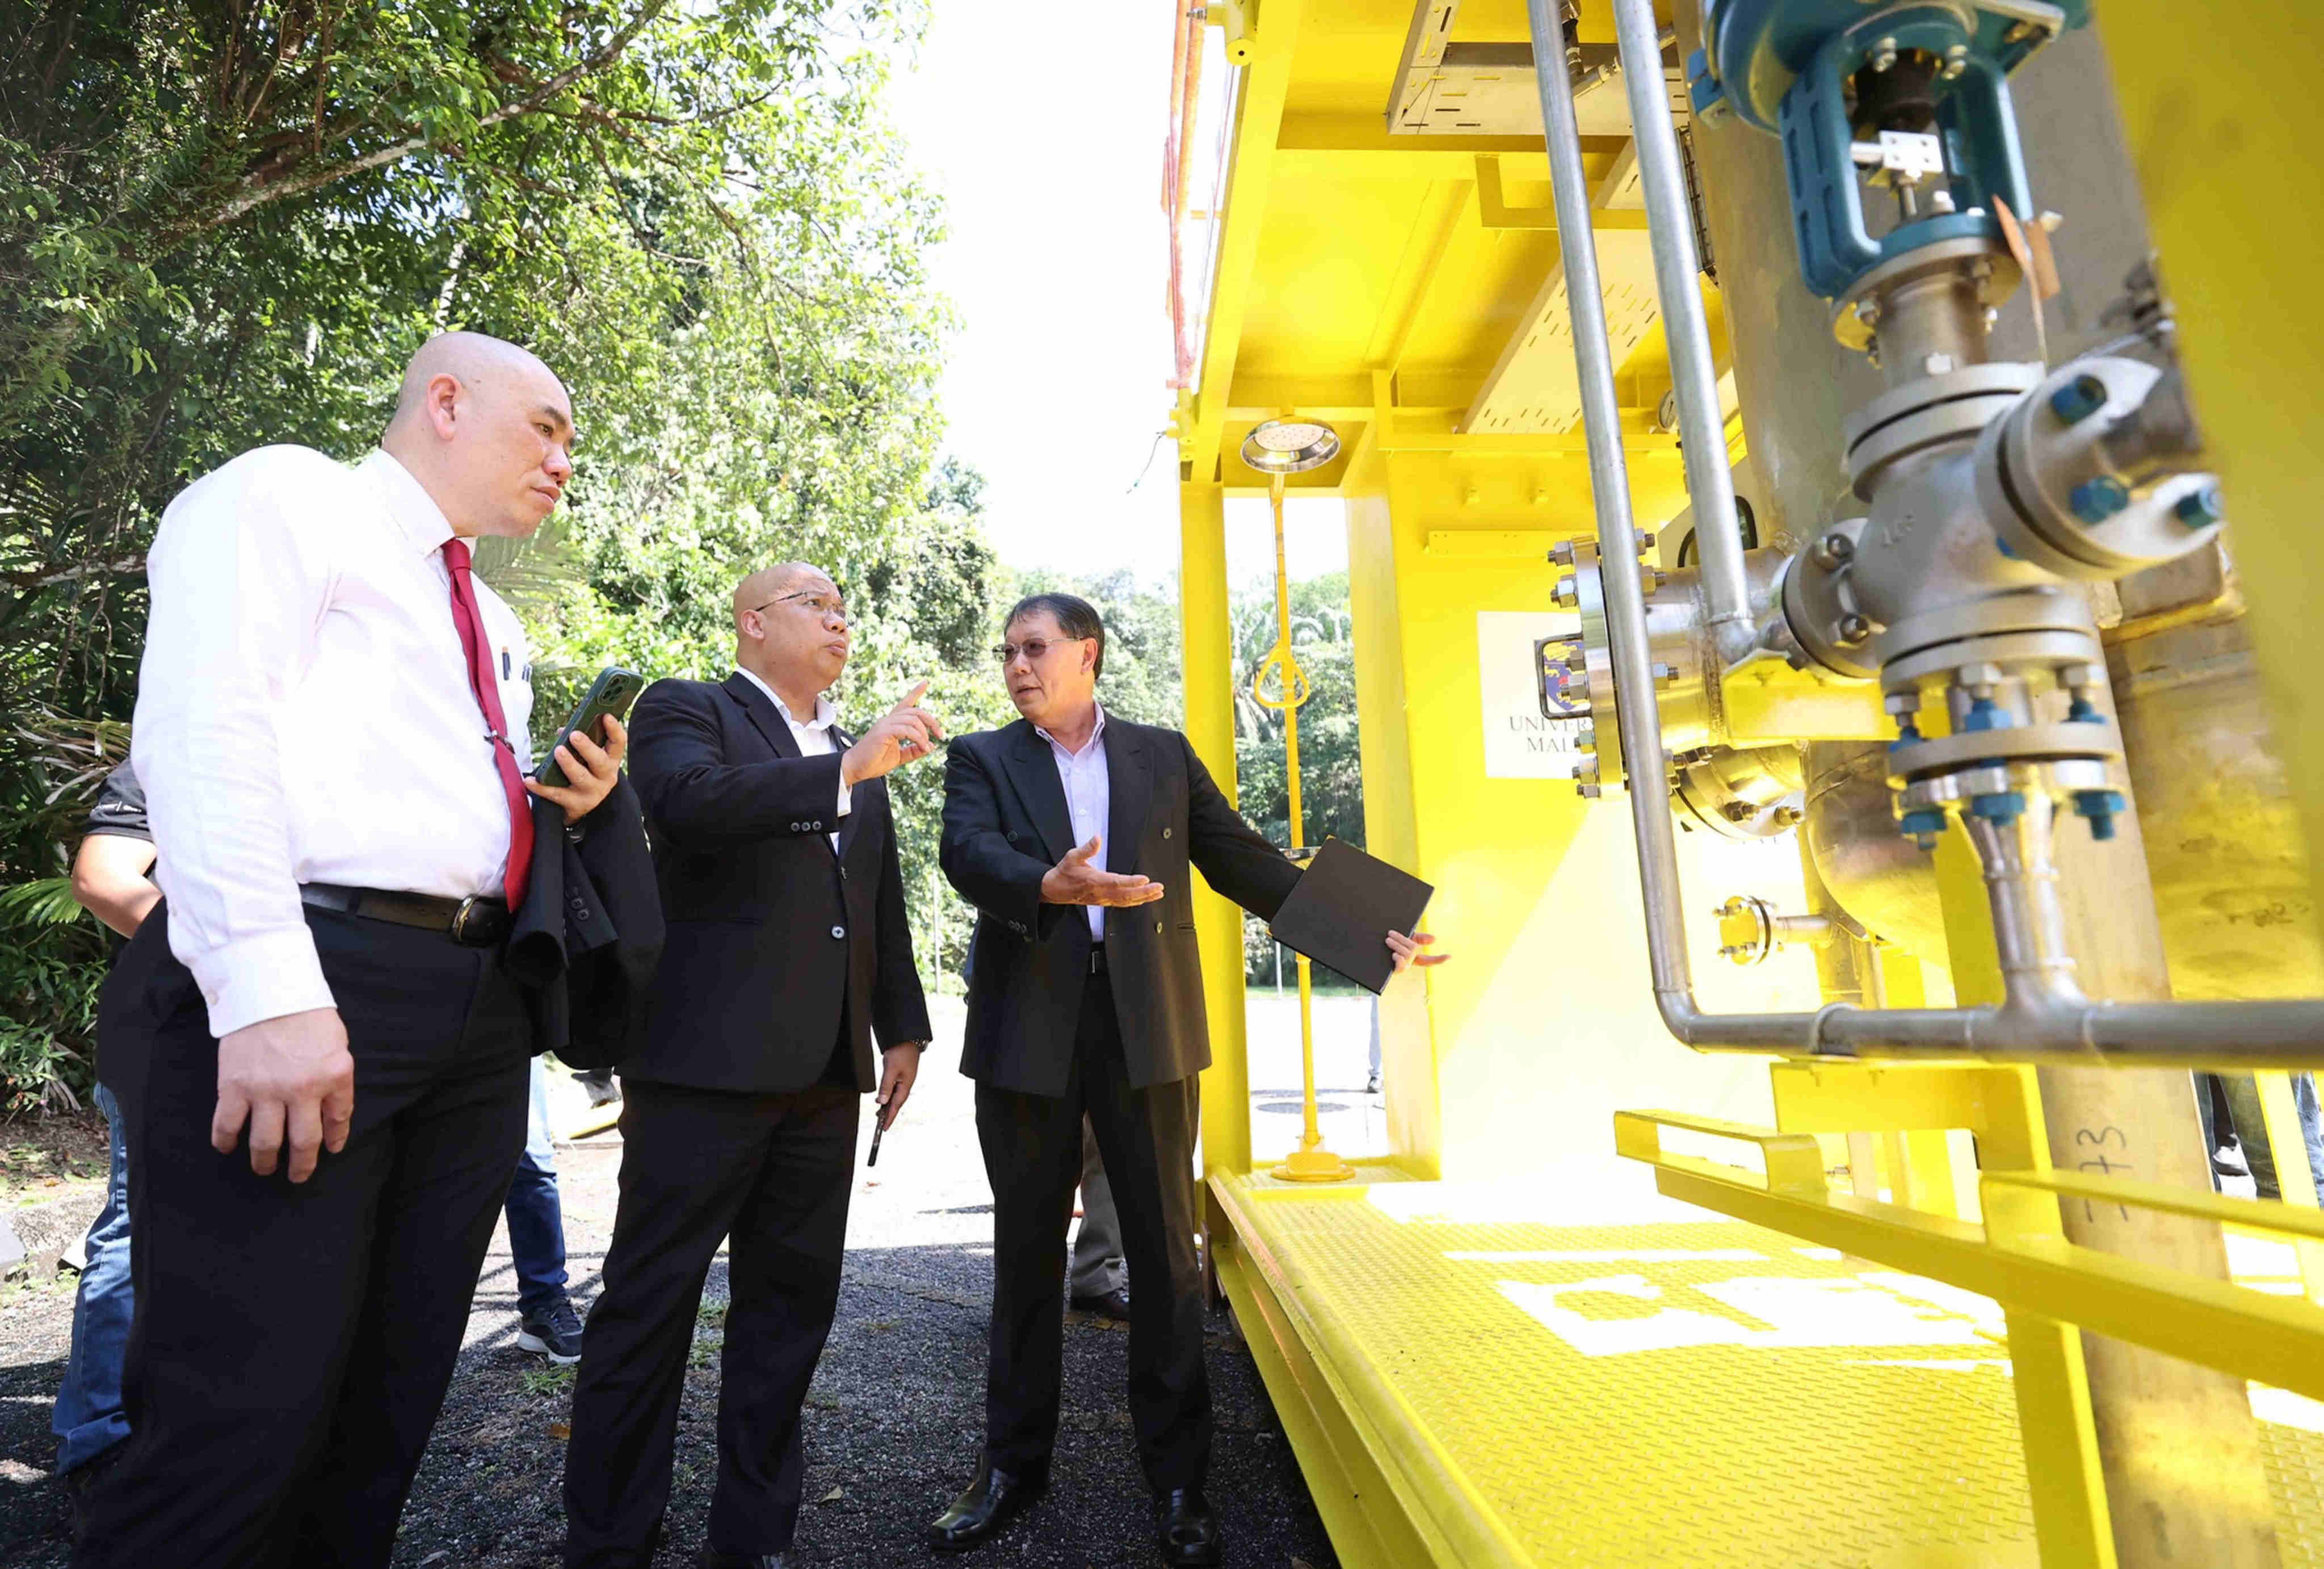 Universiti Malaya in collaboration with EPRO Advance Technology is introducing the world’s first silicon-fuelled hydrogen genset on its campus. Photo: Facebook/@Universiti Malaya